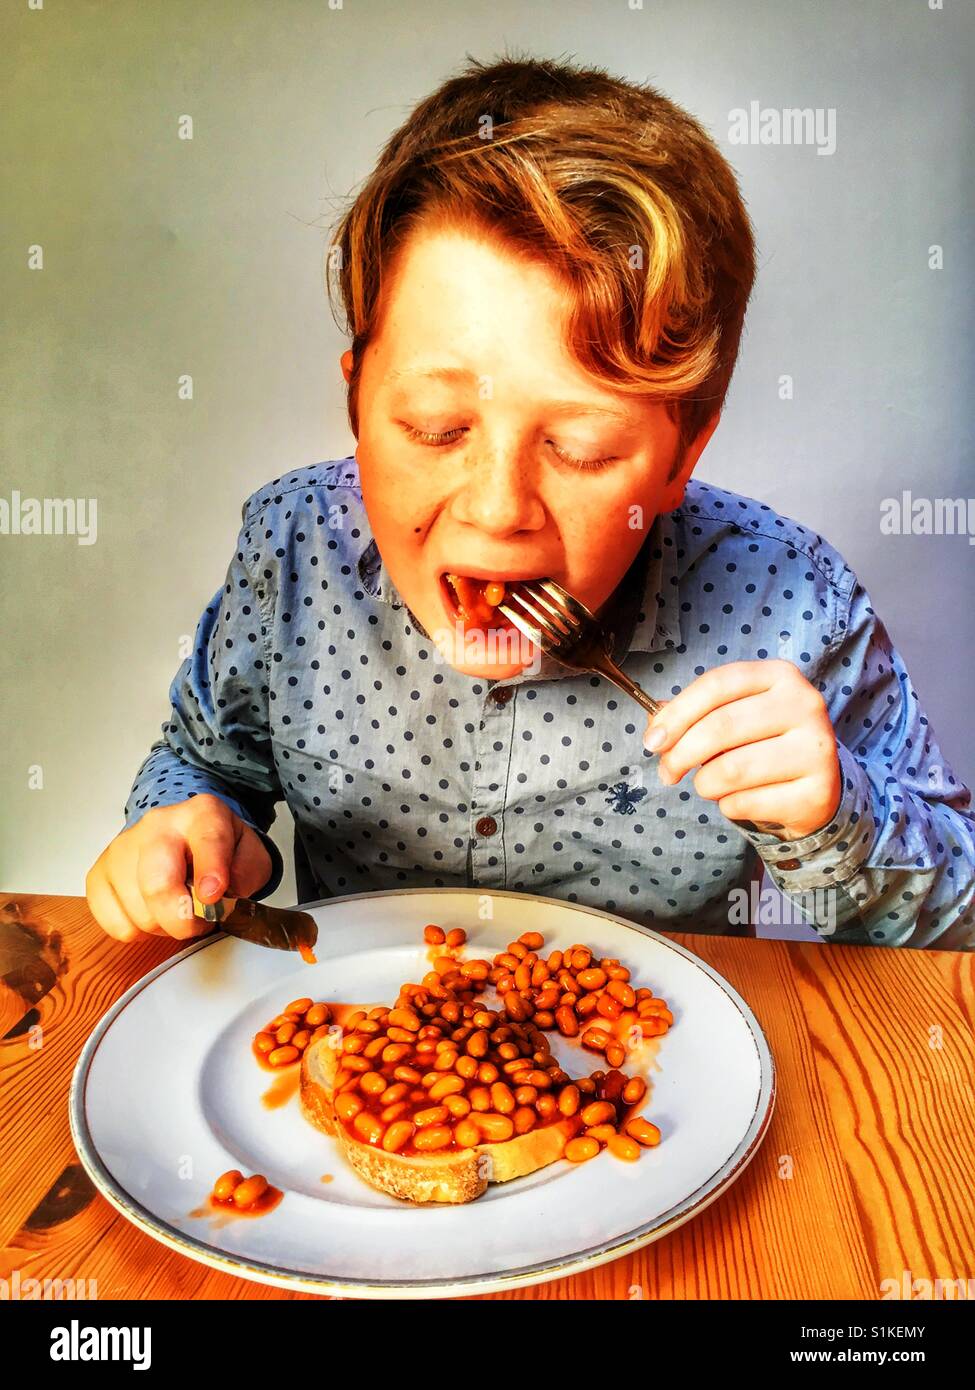 11-year old boy eating beans on toast Stock Photo